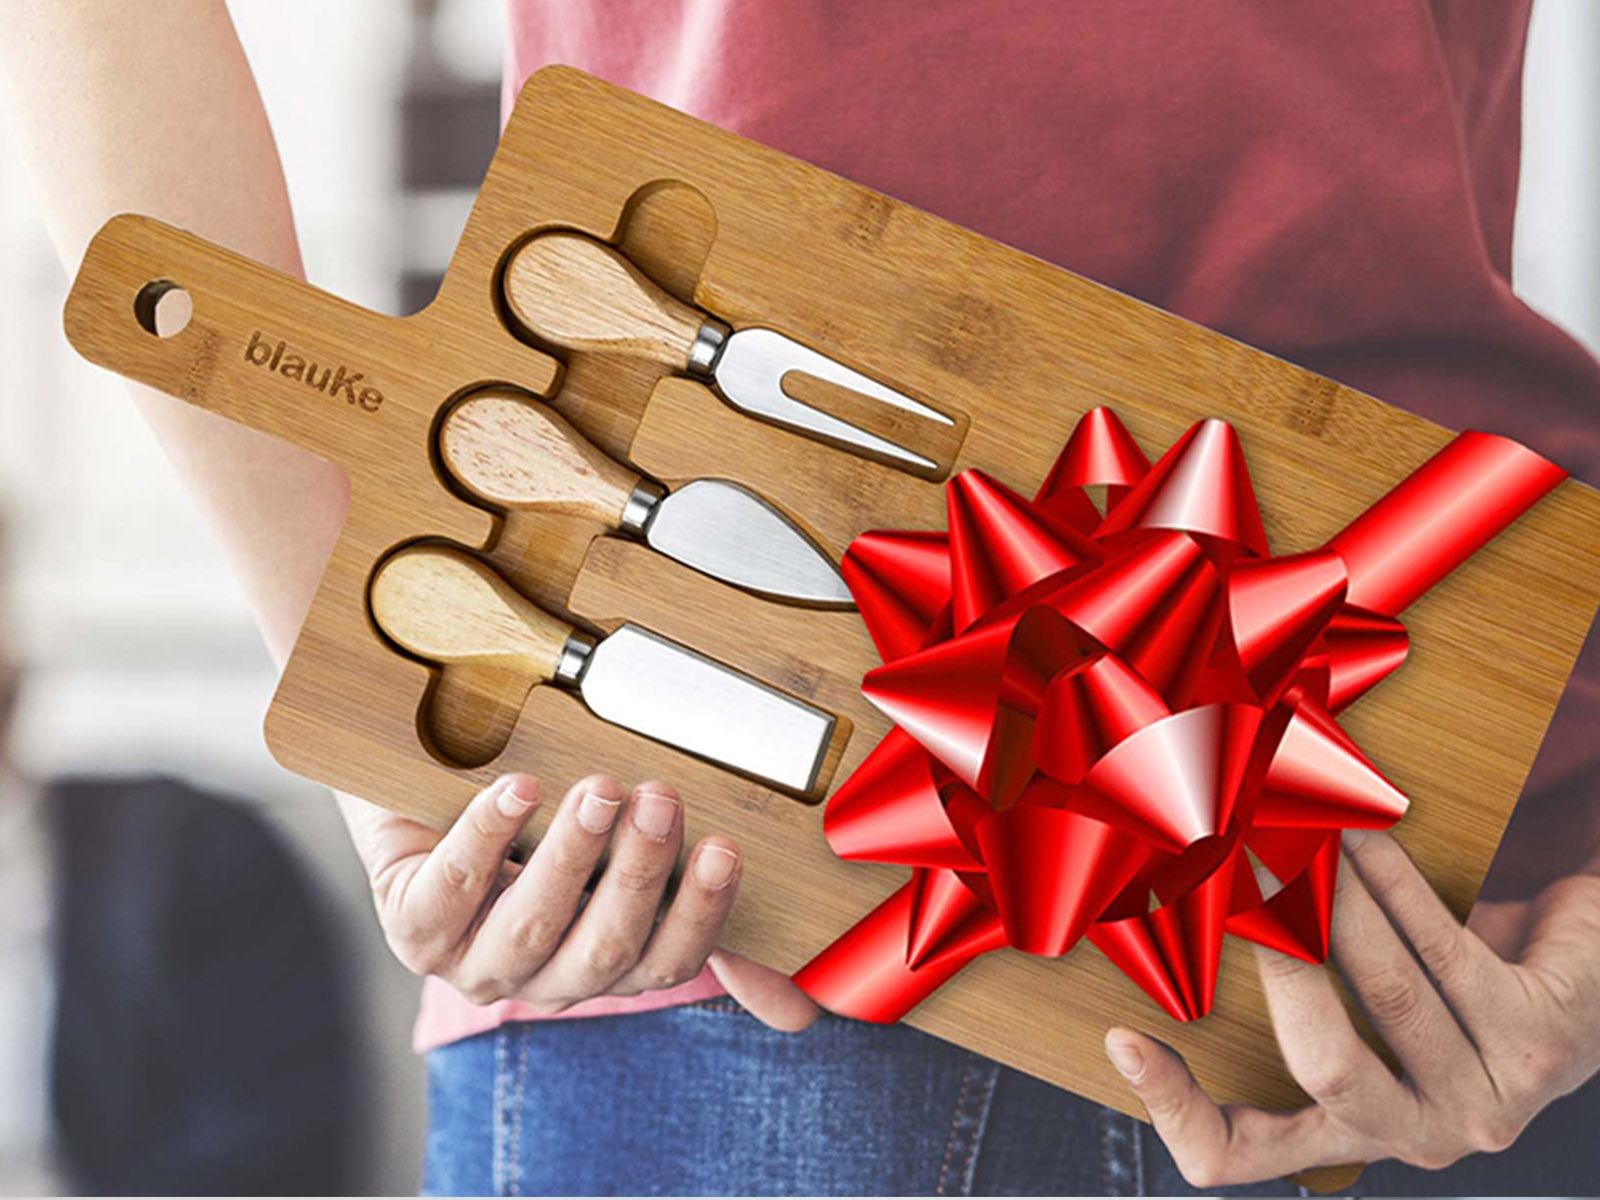 Bamboo Cheese Board and Knife Set - 12x8 inch Charcuterie Board with Magnetic Cutlery Storage - Wood Serving Tray with Handle